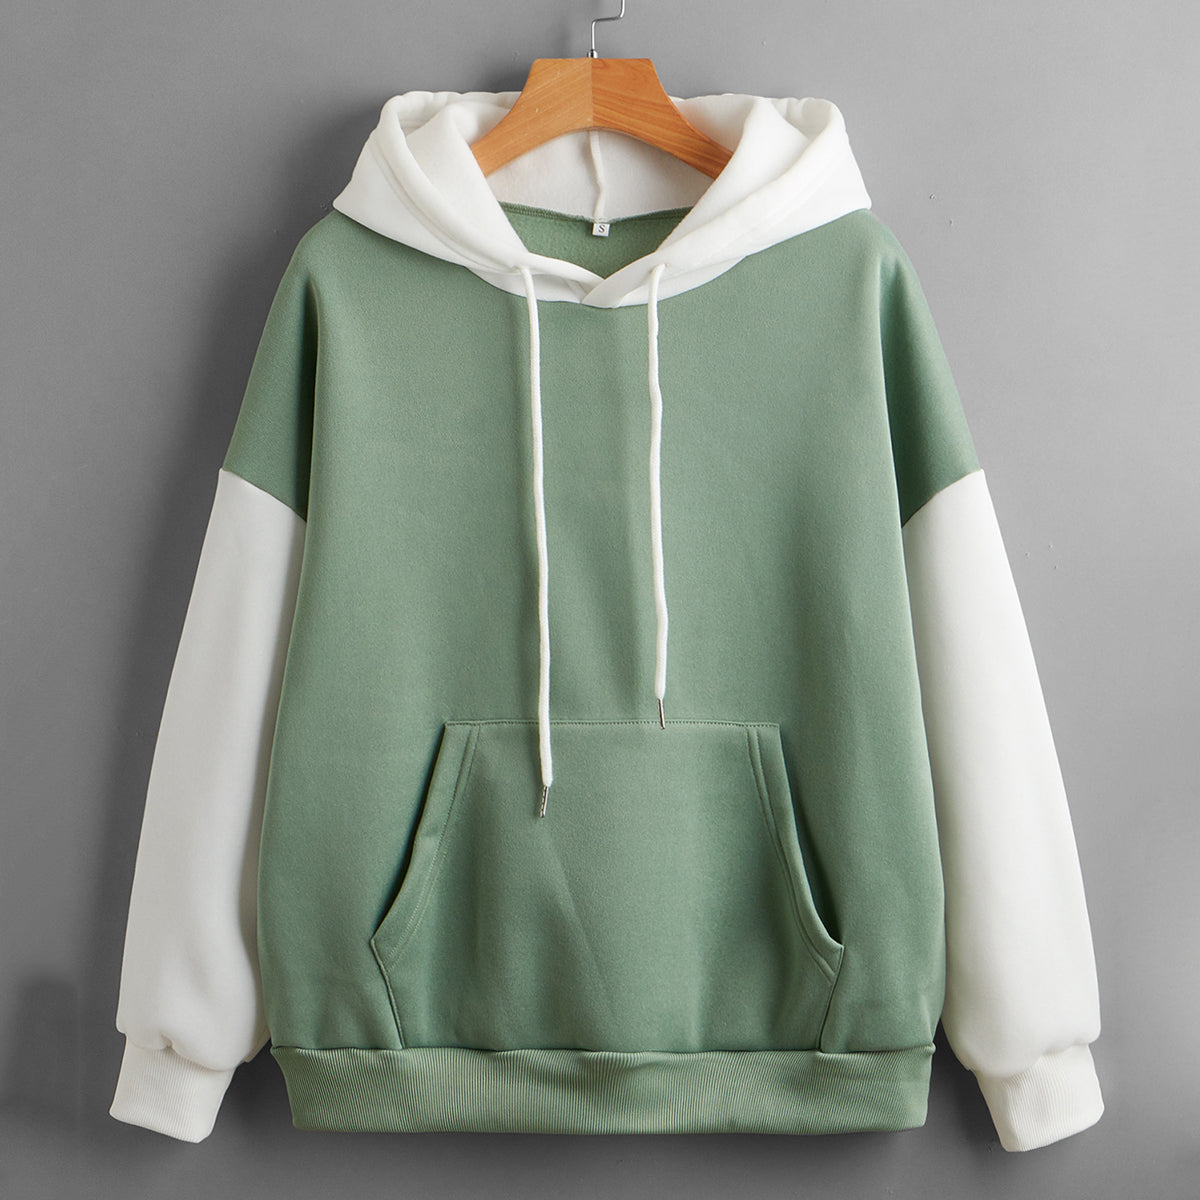 Fleece Lined Thickened Hooded Color Matching Hoodie Women Fashionable Autumn Winter Korean Contrast Color  Delivery